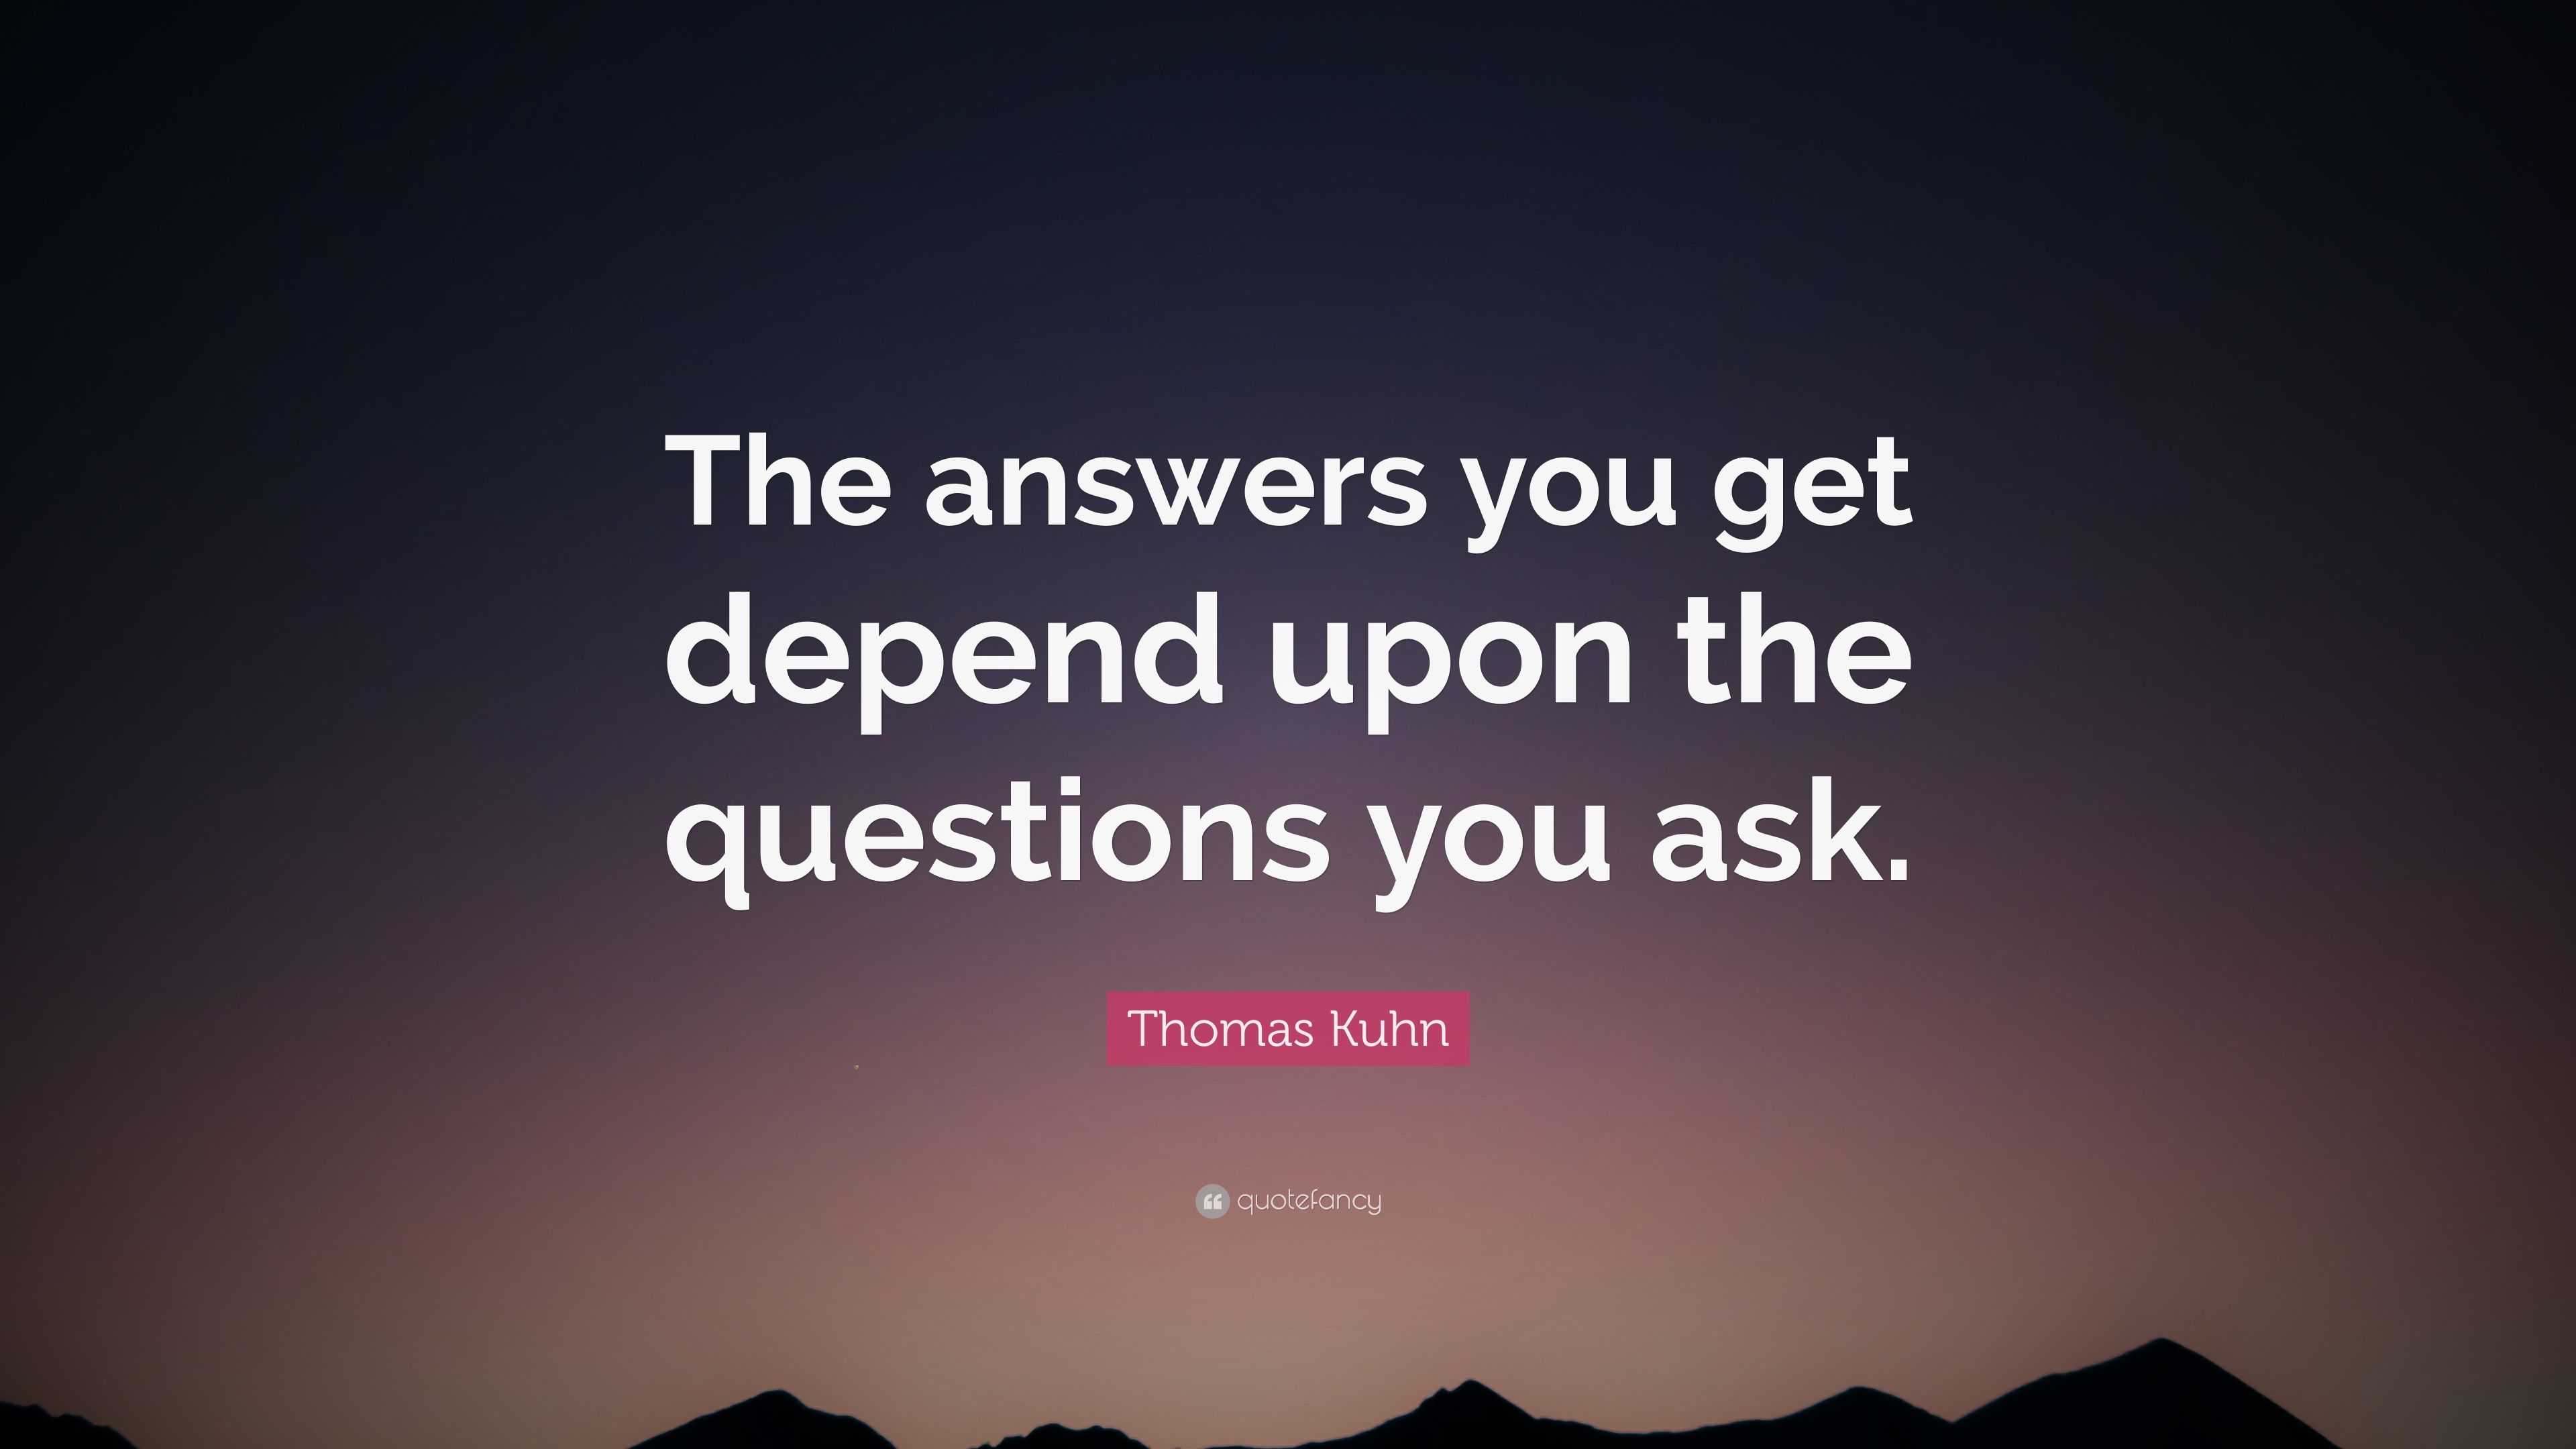 Thomas Kuhn Quote: “The answers you get depend upon the questions you ask.”